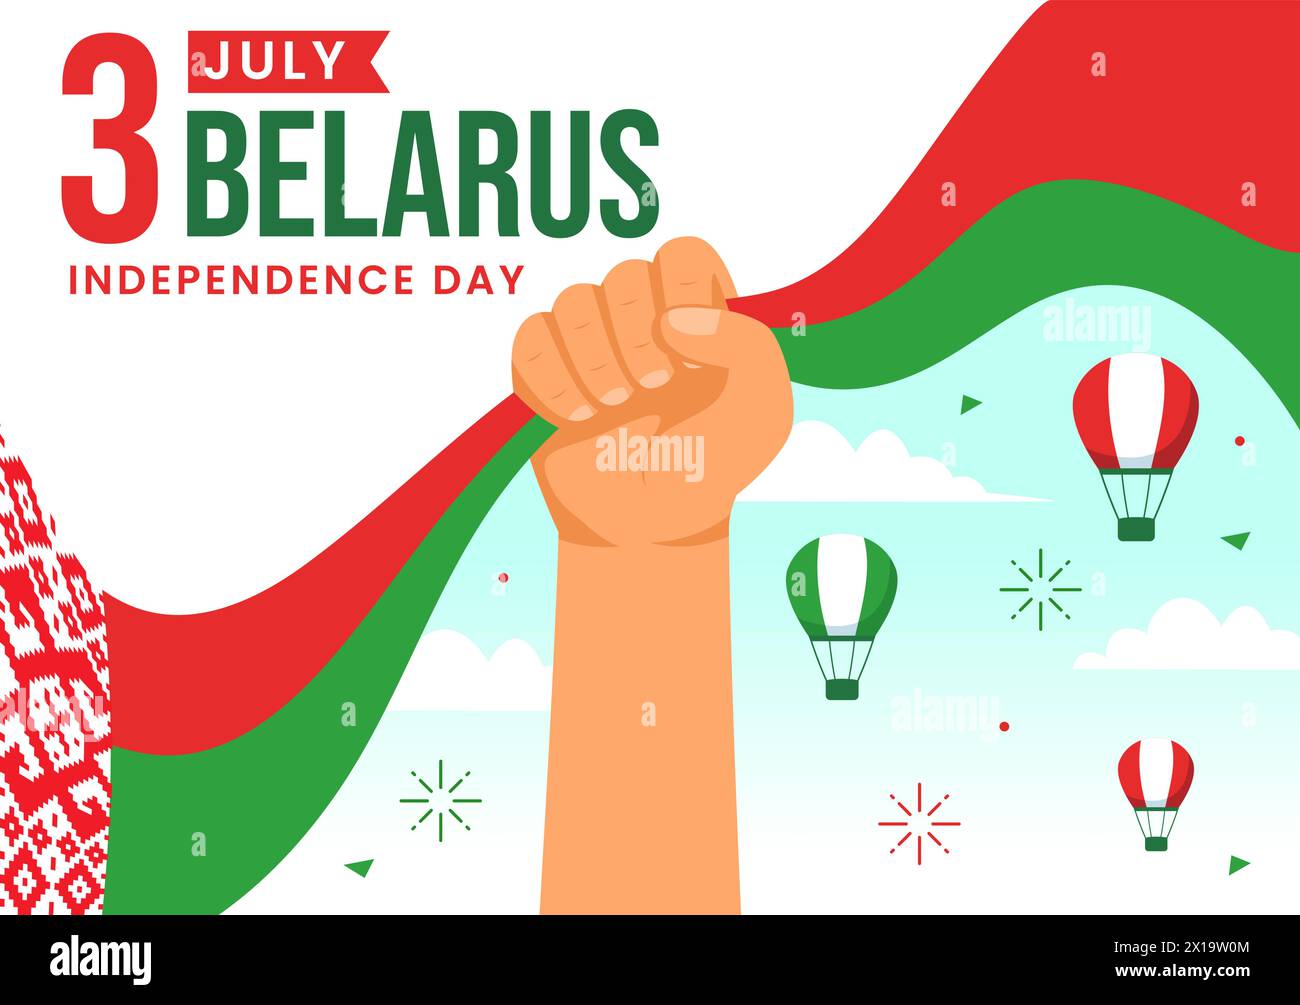 Happy Belarus Independence Day Vector Illustration on 3 July with Waving Flag and Ribbon in National Holiday Flat Cartoon Background Design Stock Vector